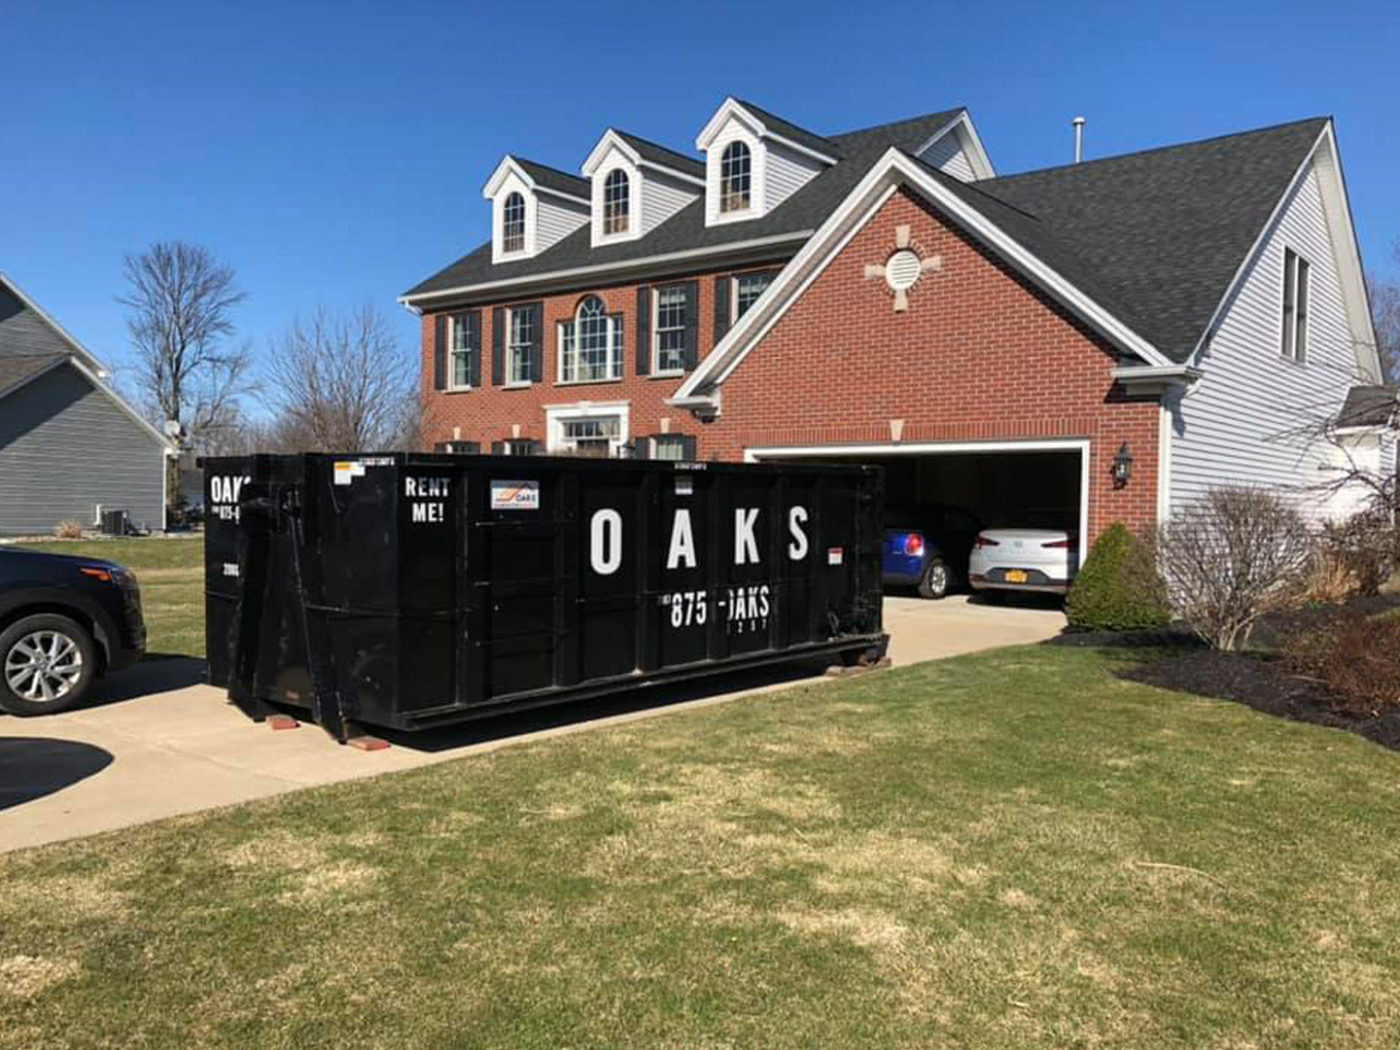 Dumpster in front of a house